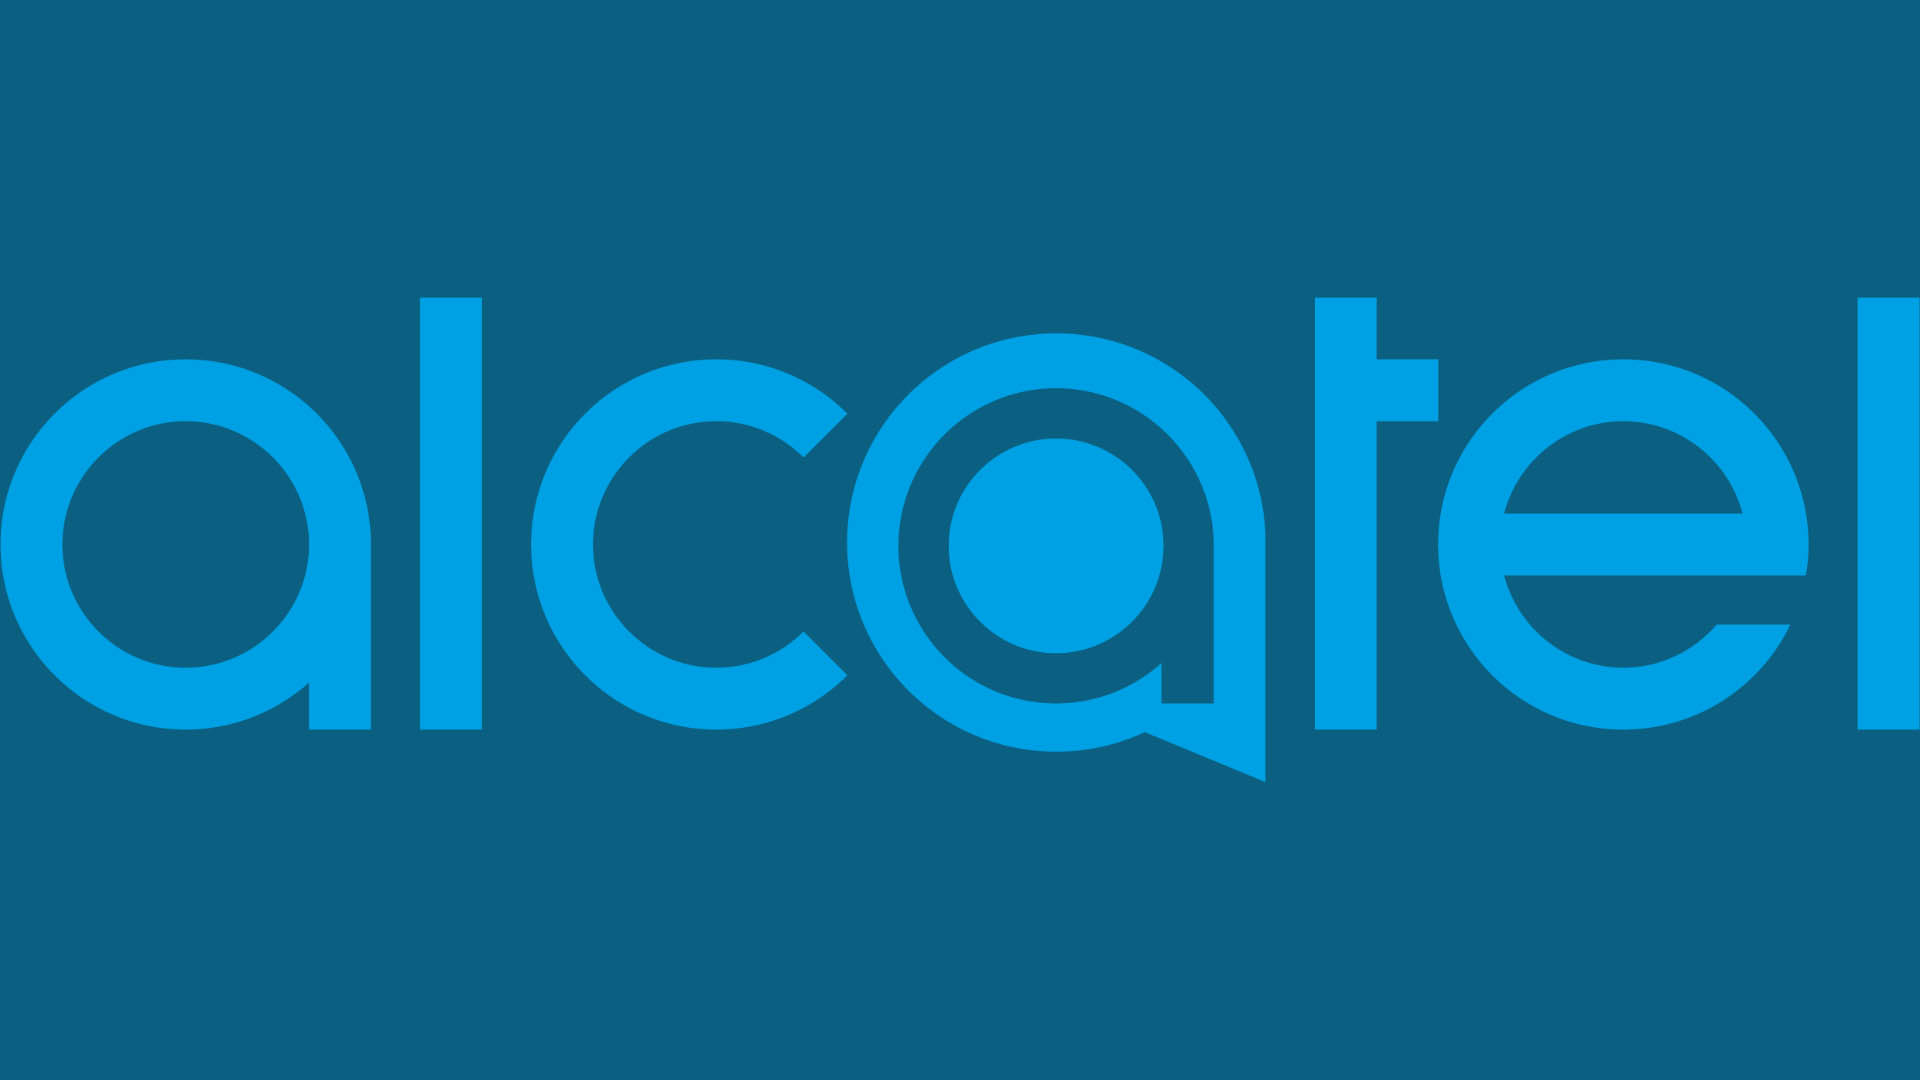 Download All Alcatel Stock Rom Firmwares || Fully Tested